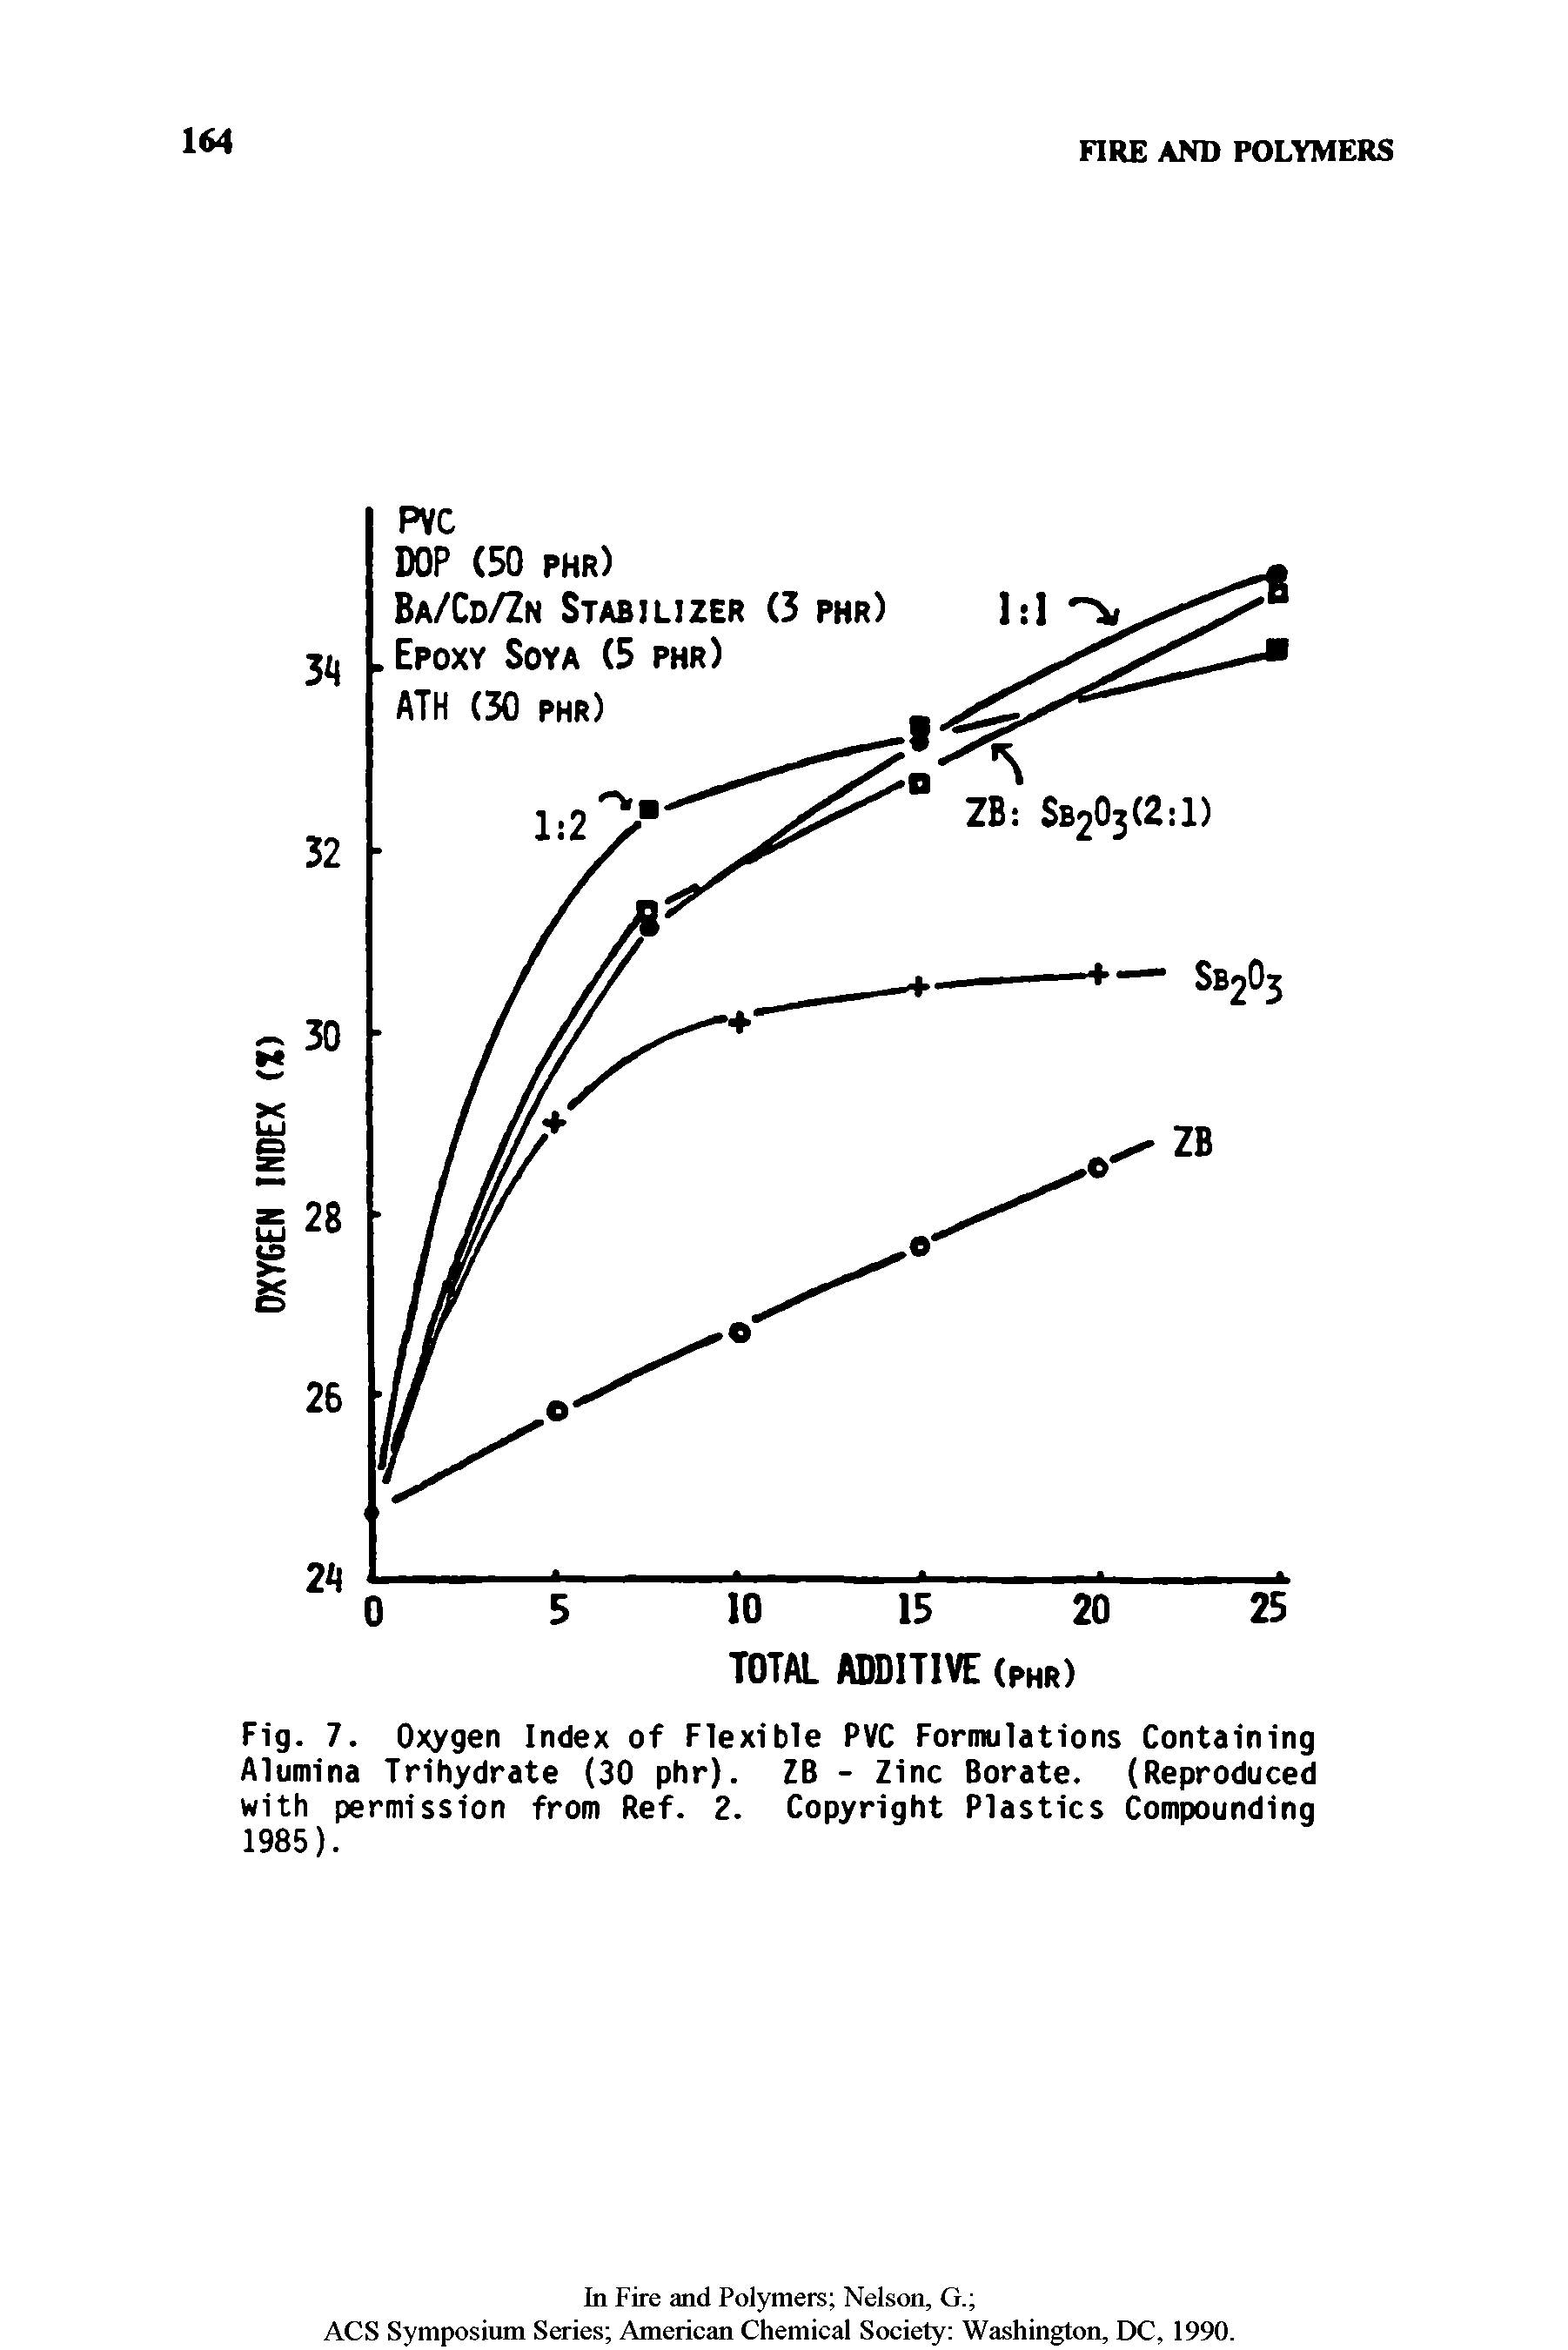 Fig. 7. Oxygen Index of Flexible PVC Formulations Containing Alumina Trihydrate (30 phr). ZB - Zinc Borate. (Reproduced with permission from Ref. 2. Copyright Plastics Compounding 1985).